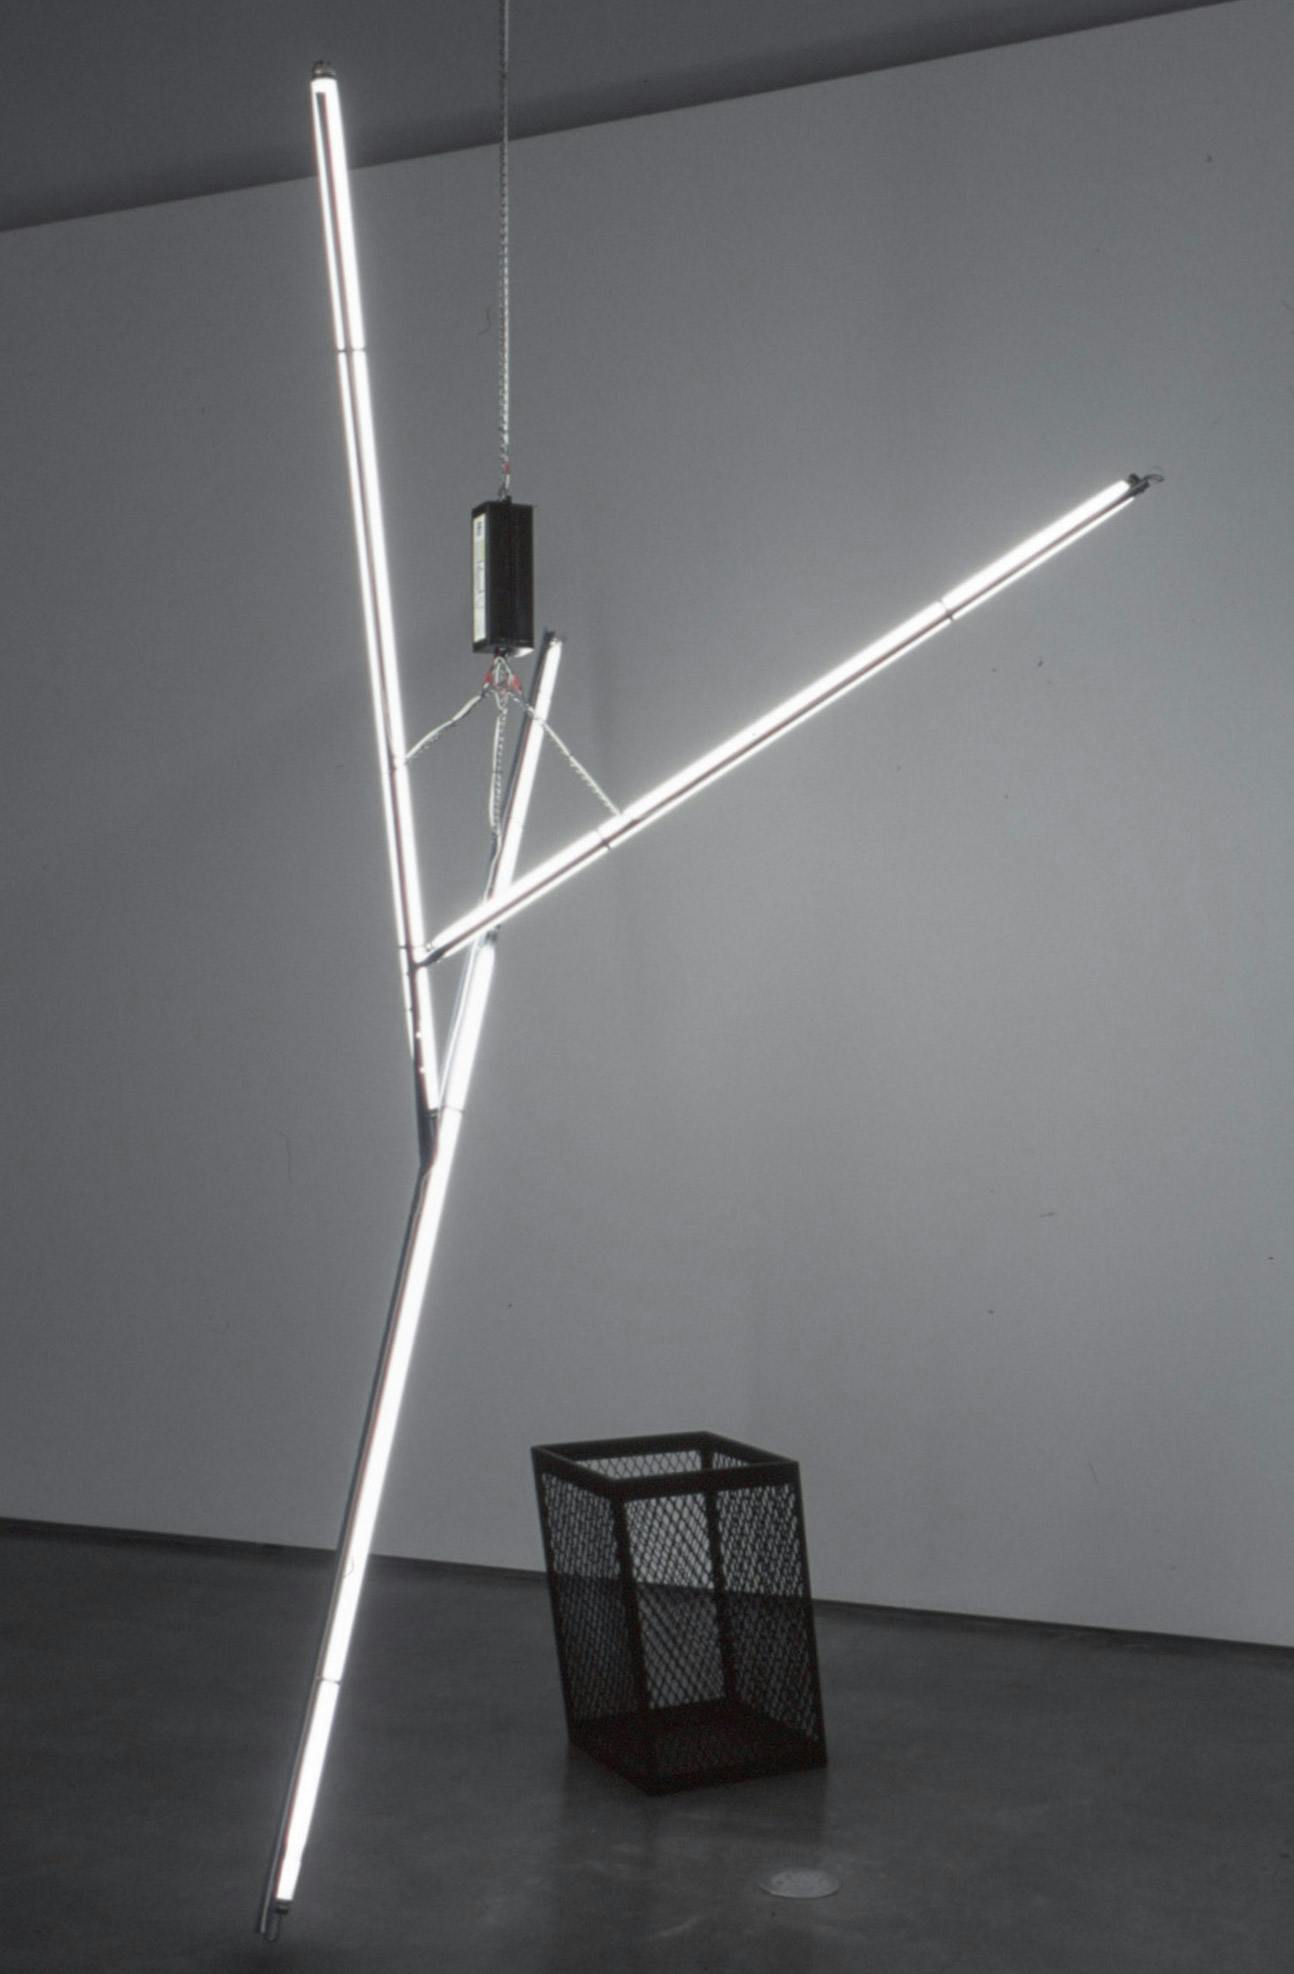 In a darkened gallery space, a large sculpture made of white tube light bulbs is hanging from the gallery ceiling. A black trash can, or an umbrella bucket, is placed behind this large sculpture. 